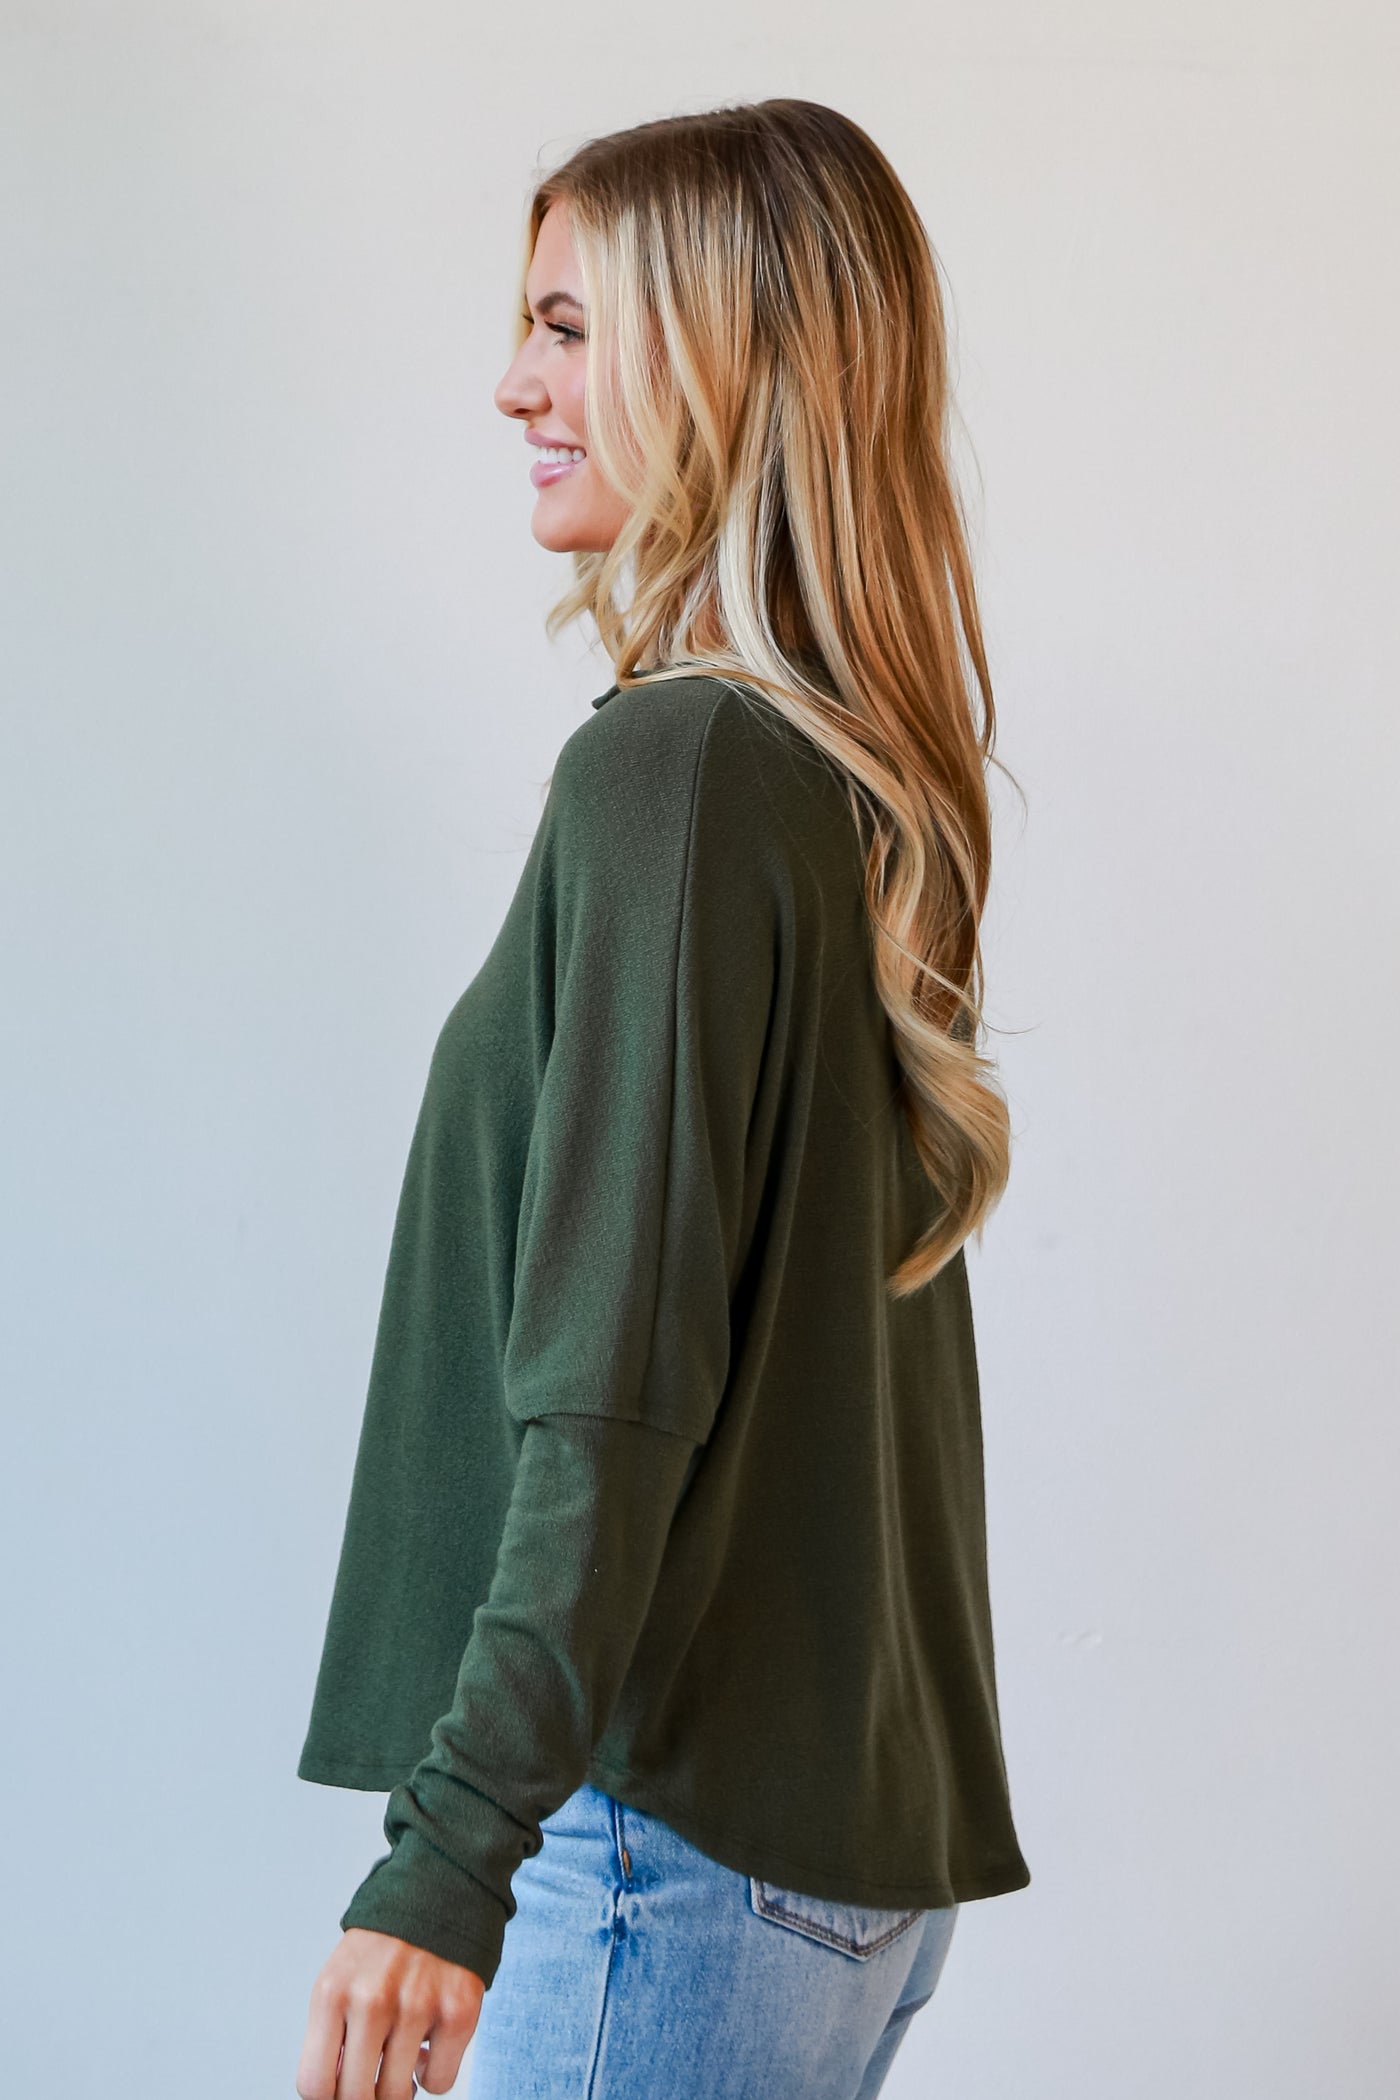 olive green Knit Top